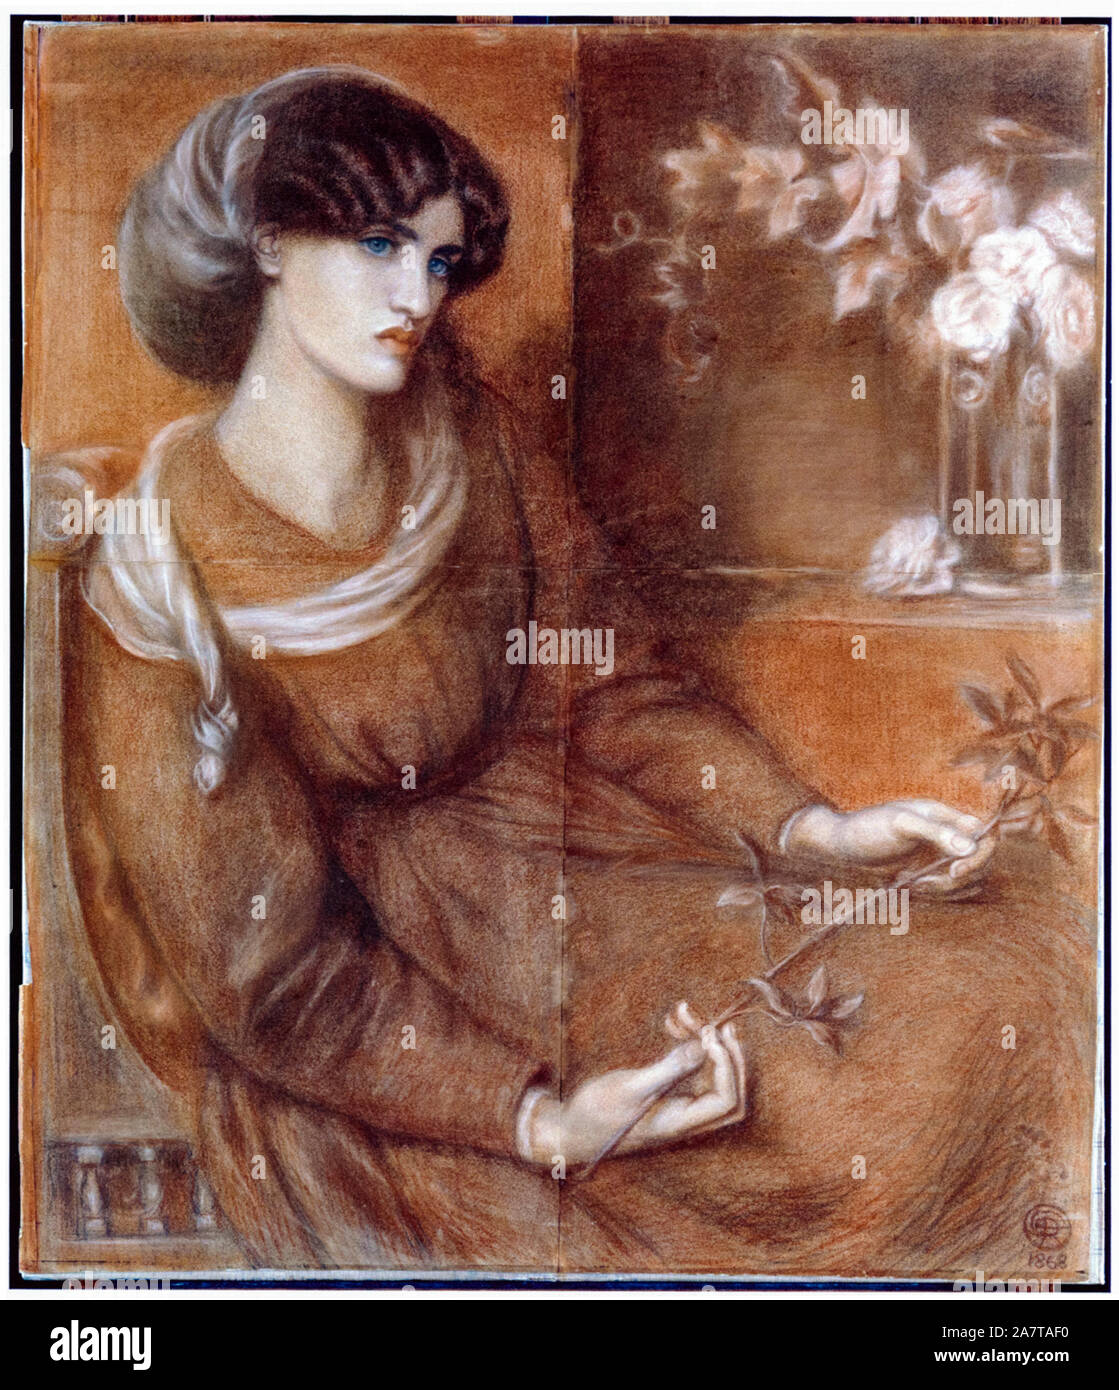 Jane Morris, Study for 'Mariana', (Mrs William Morris), drawing by Dante Gabriel Rossetti, 1868 Stock Photo